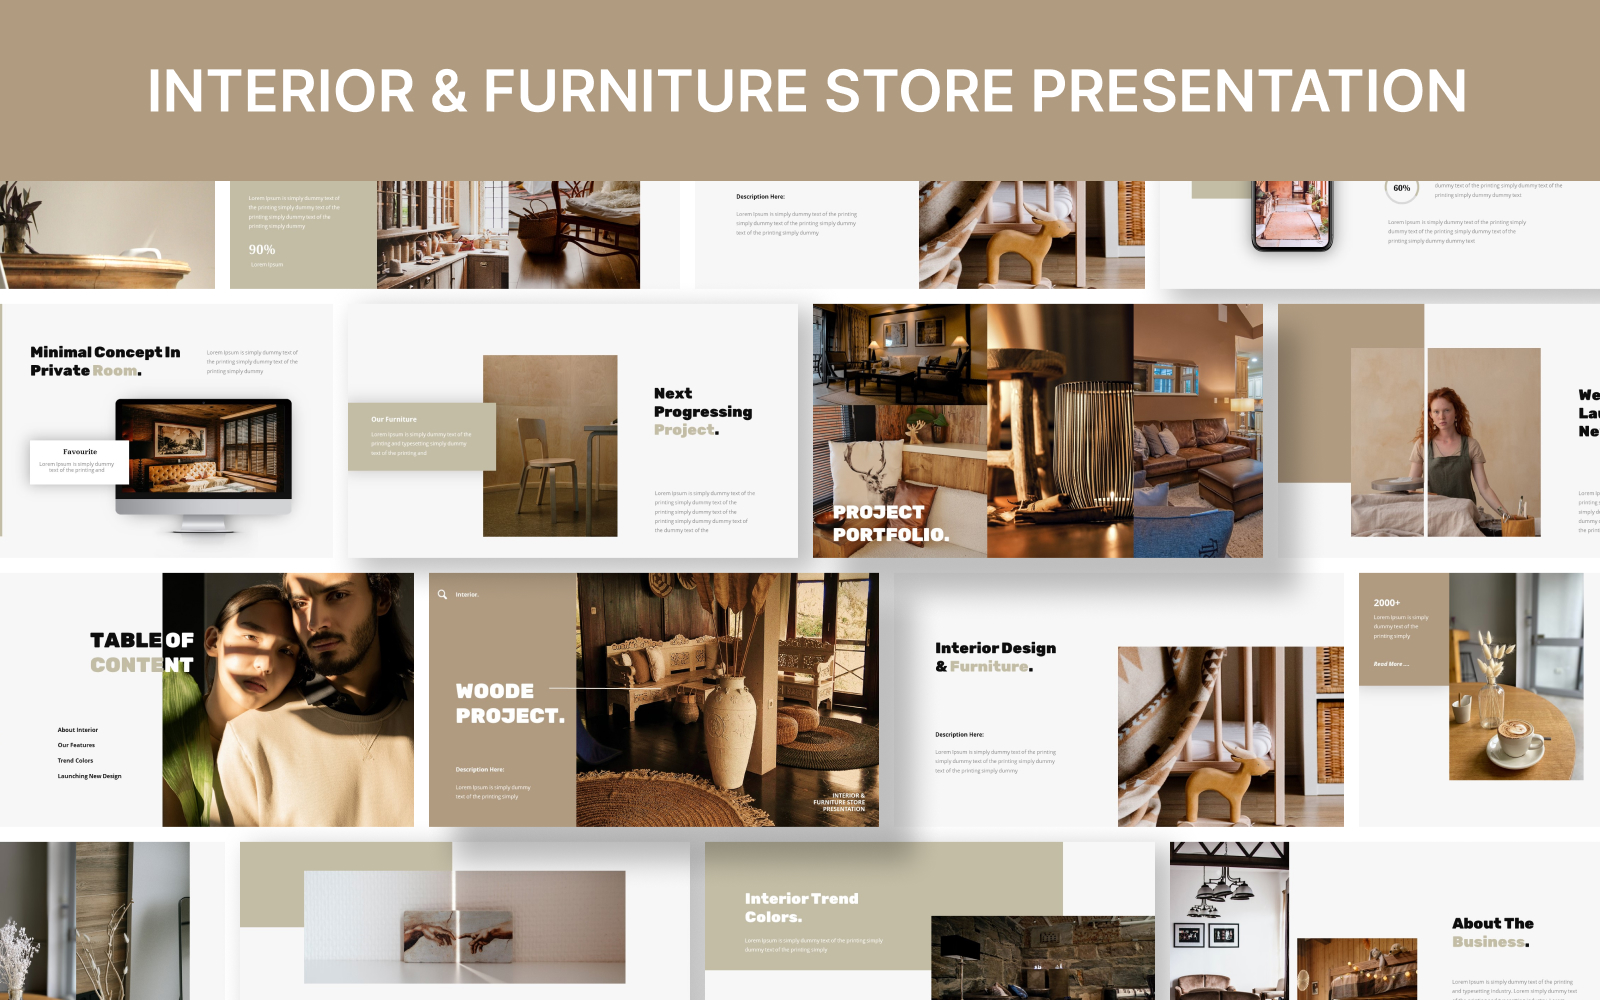 Woode Project - Interior & Furniture Store Powerpoint Presentation Template